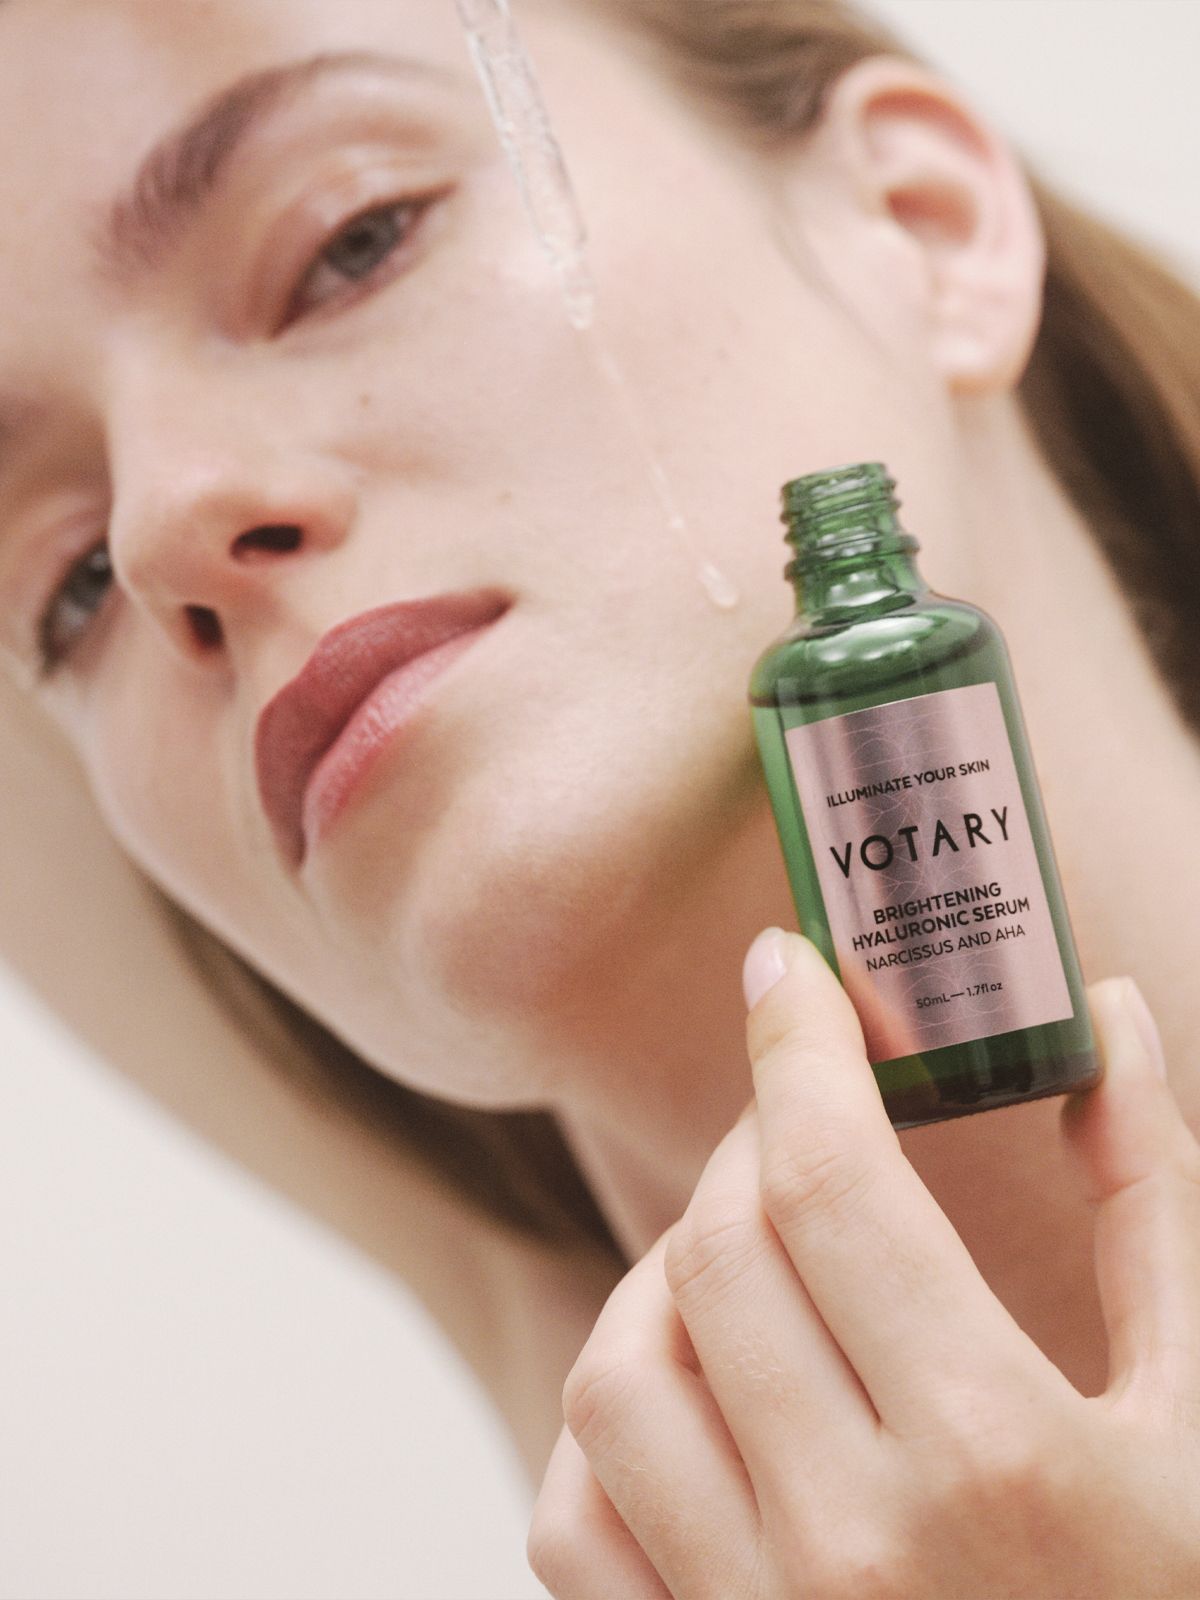 Image of a woman dripping Votary product on her face